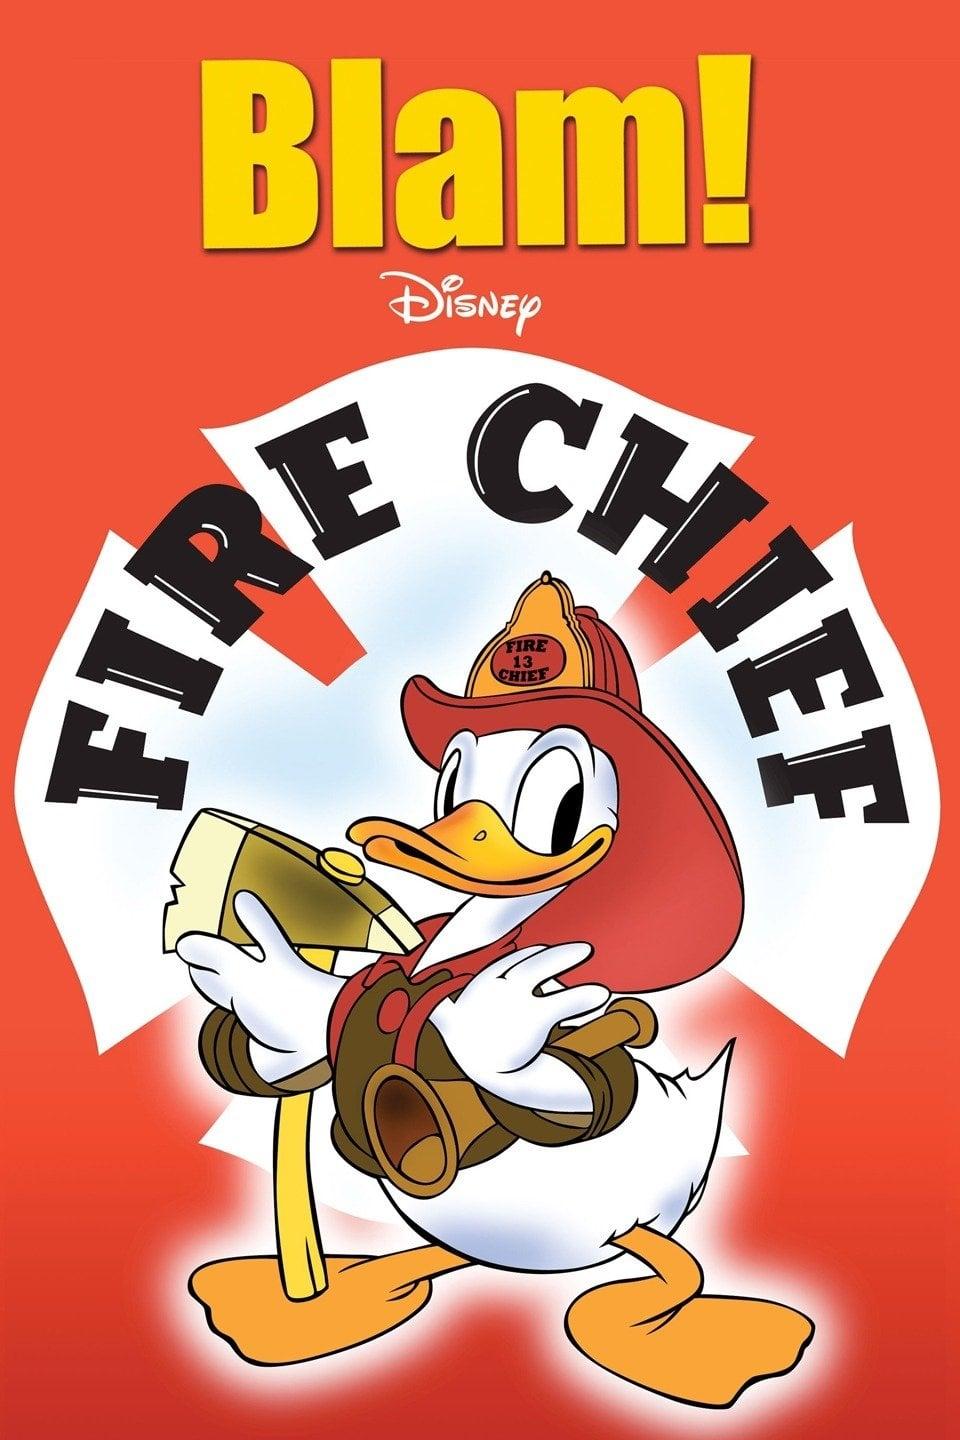 Fire Chief poster